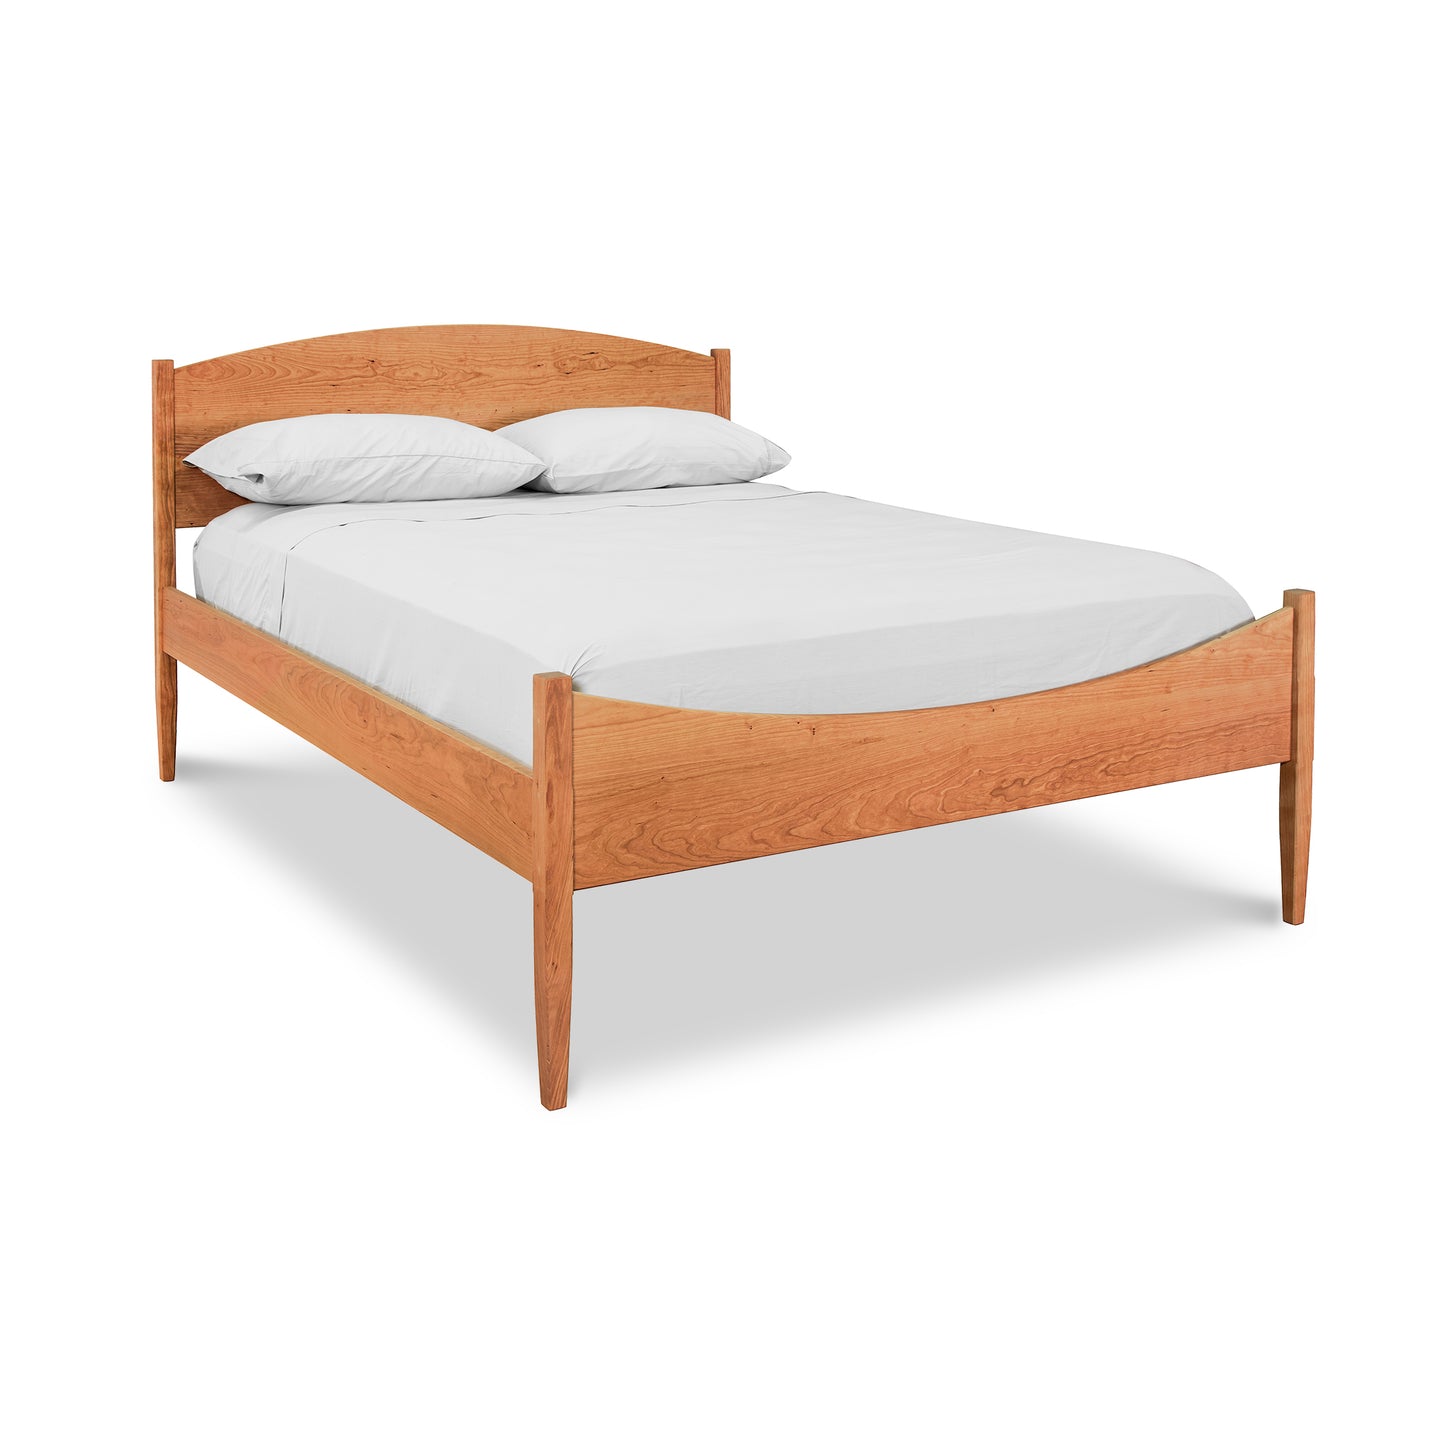 A Maple Corner Woodworks Vermont Shaker Moon Bed wooden platform bed frame with a mattress covered with white bedding and two pillows against a white background.